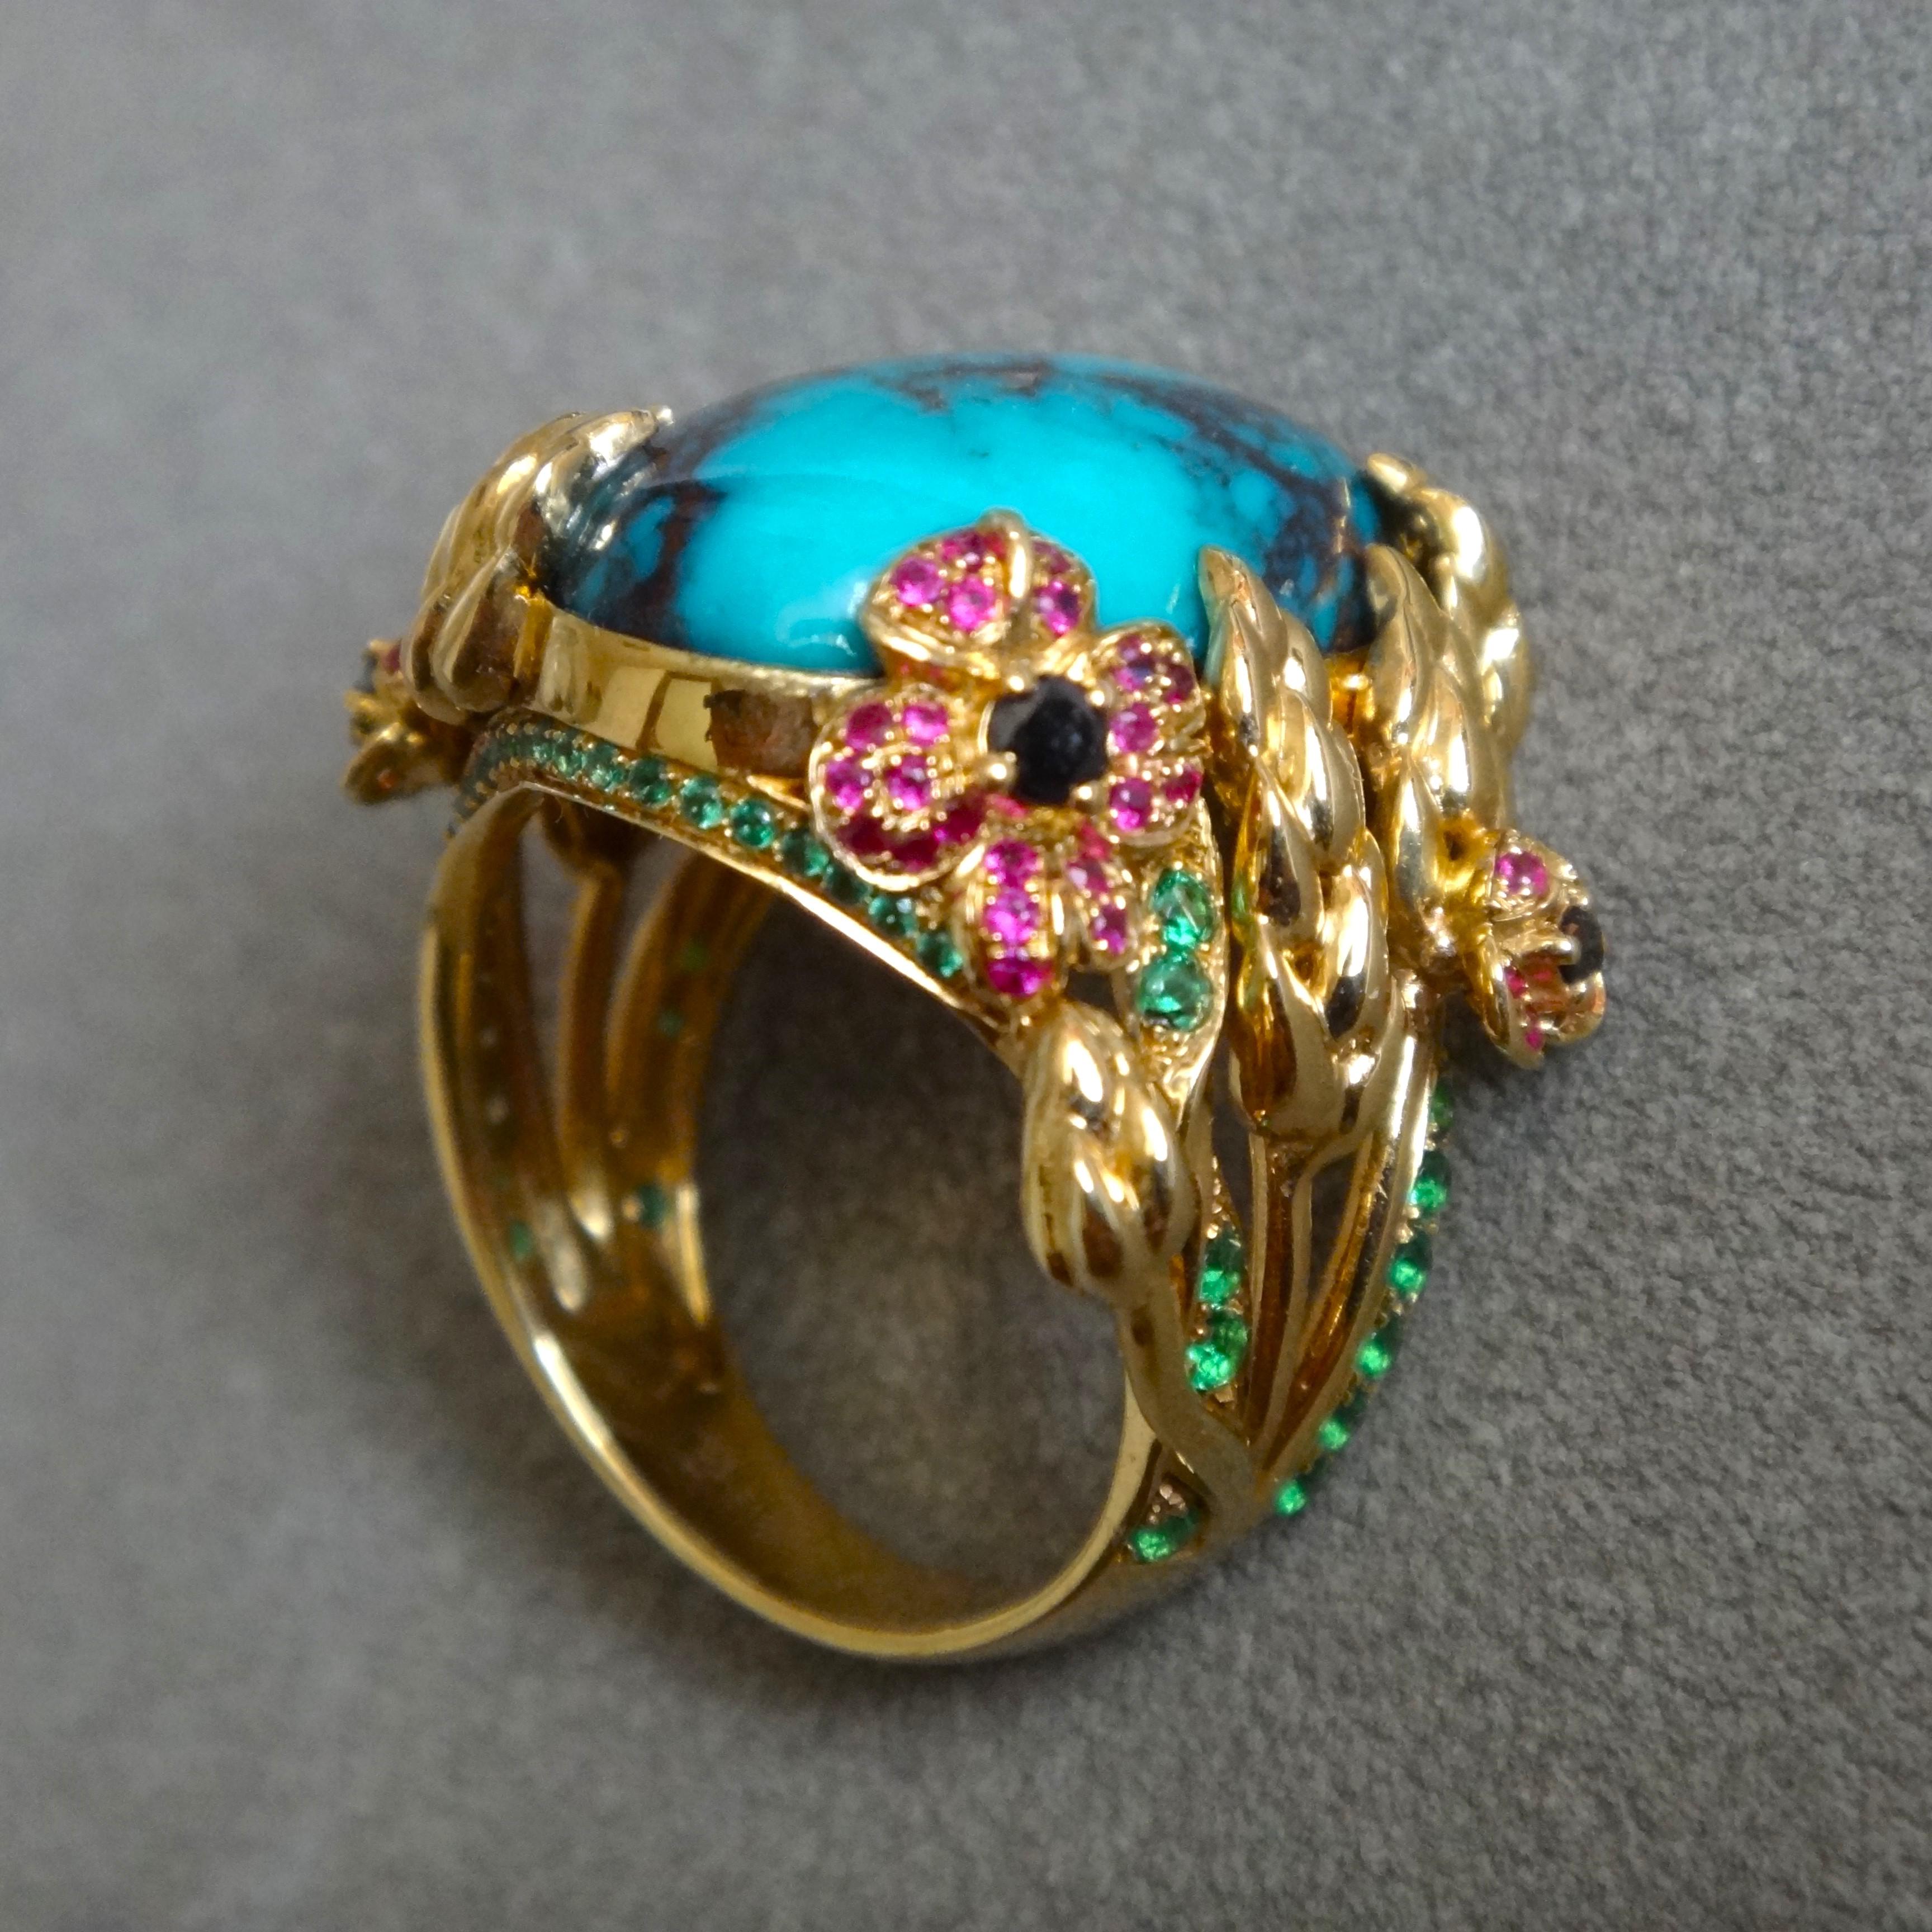 21Carat Natural Bisbee Turquoise 18K Gold Ruby and Tsavorite Cocktail Ring For Sale 2